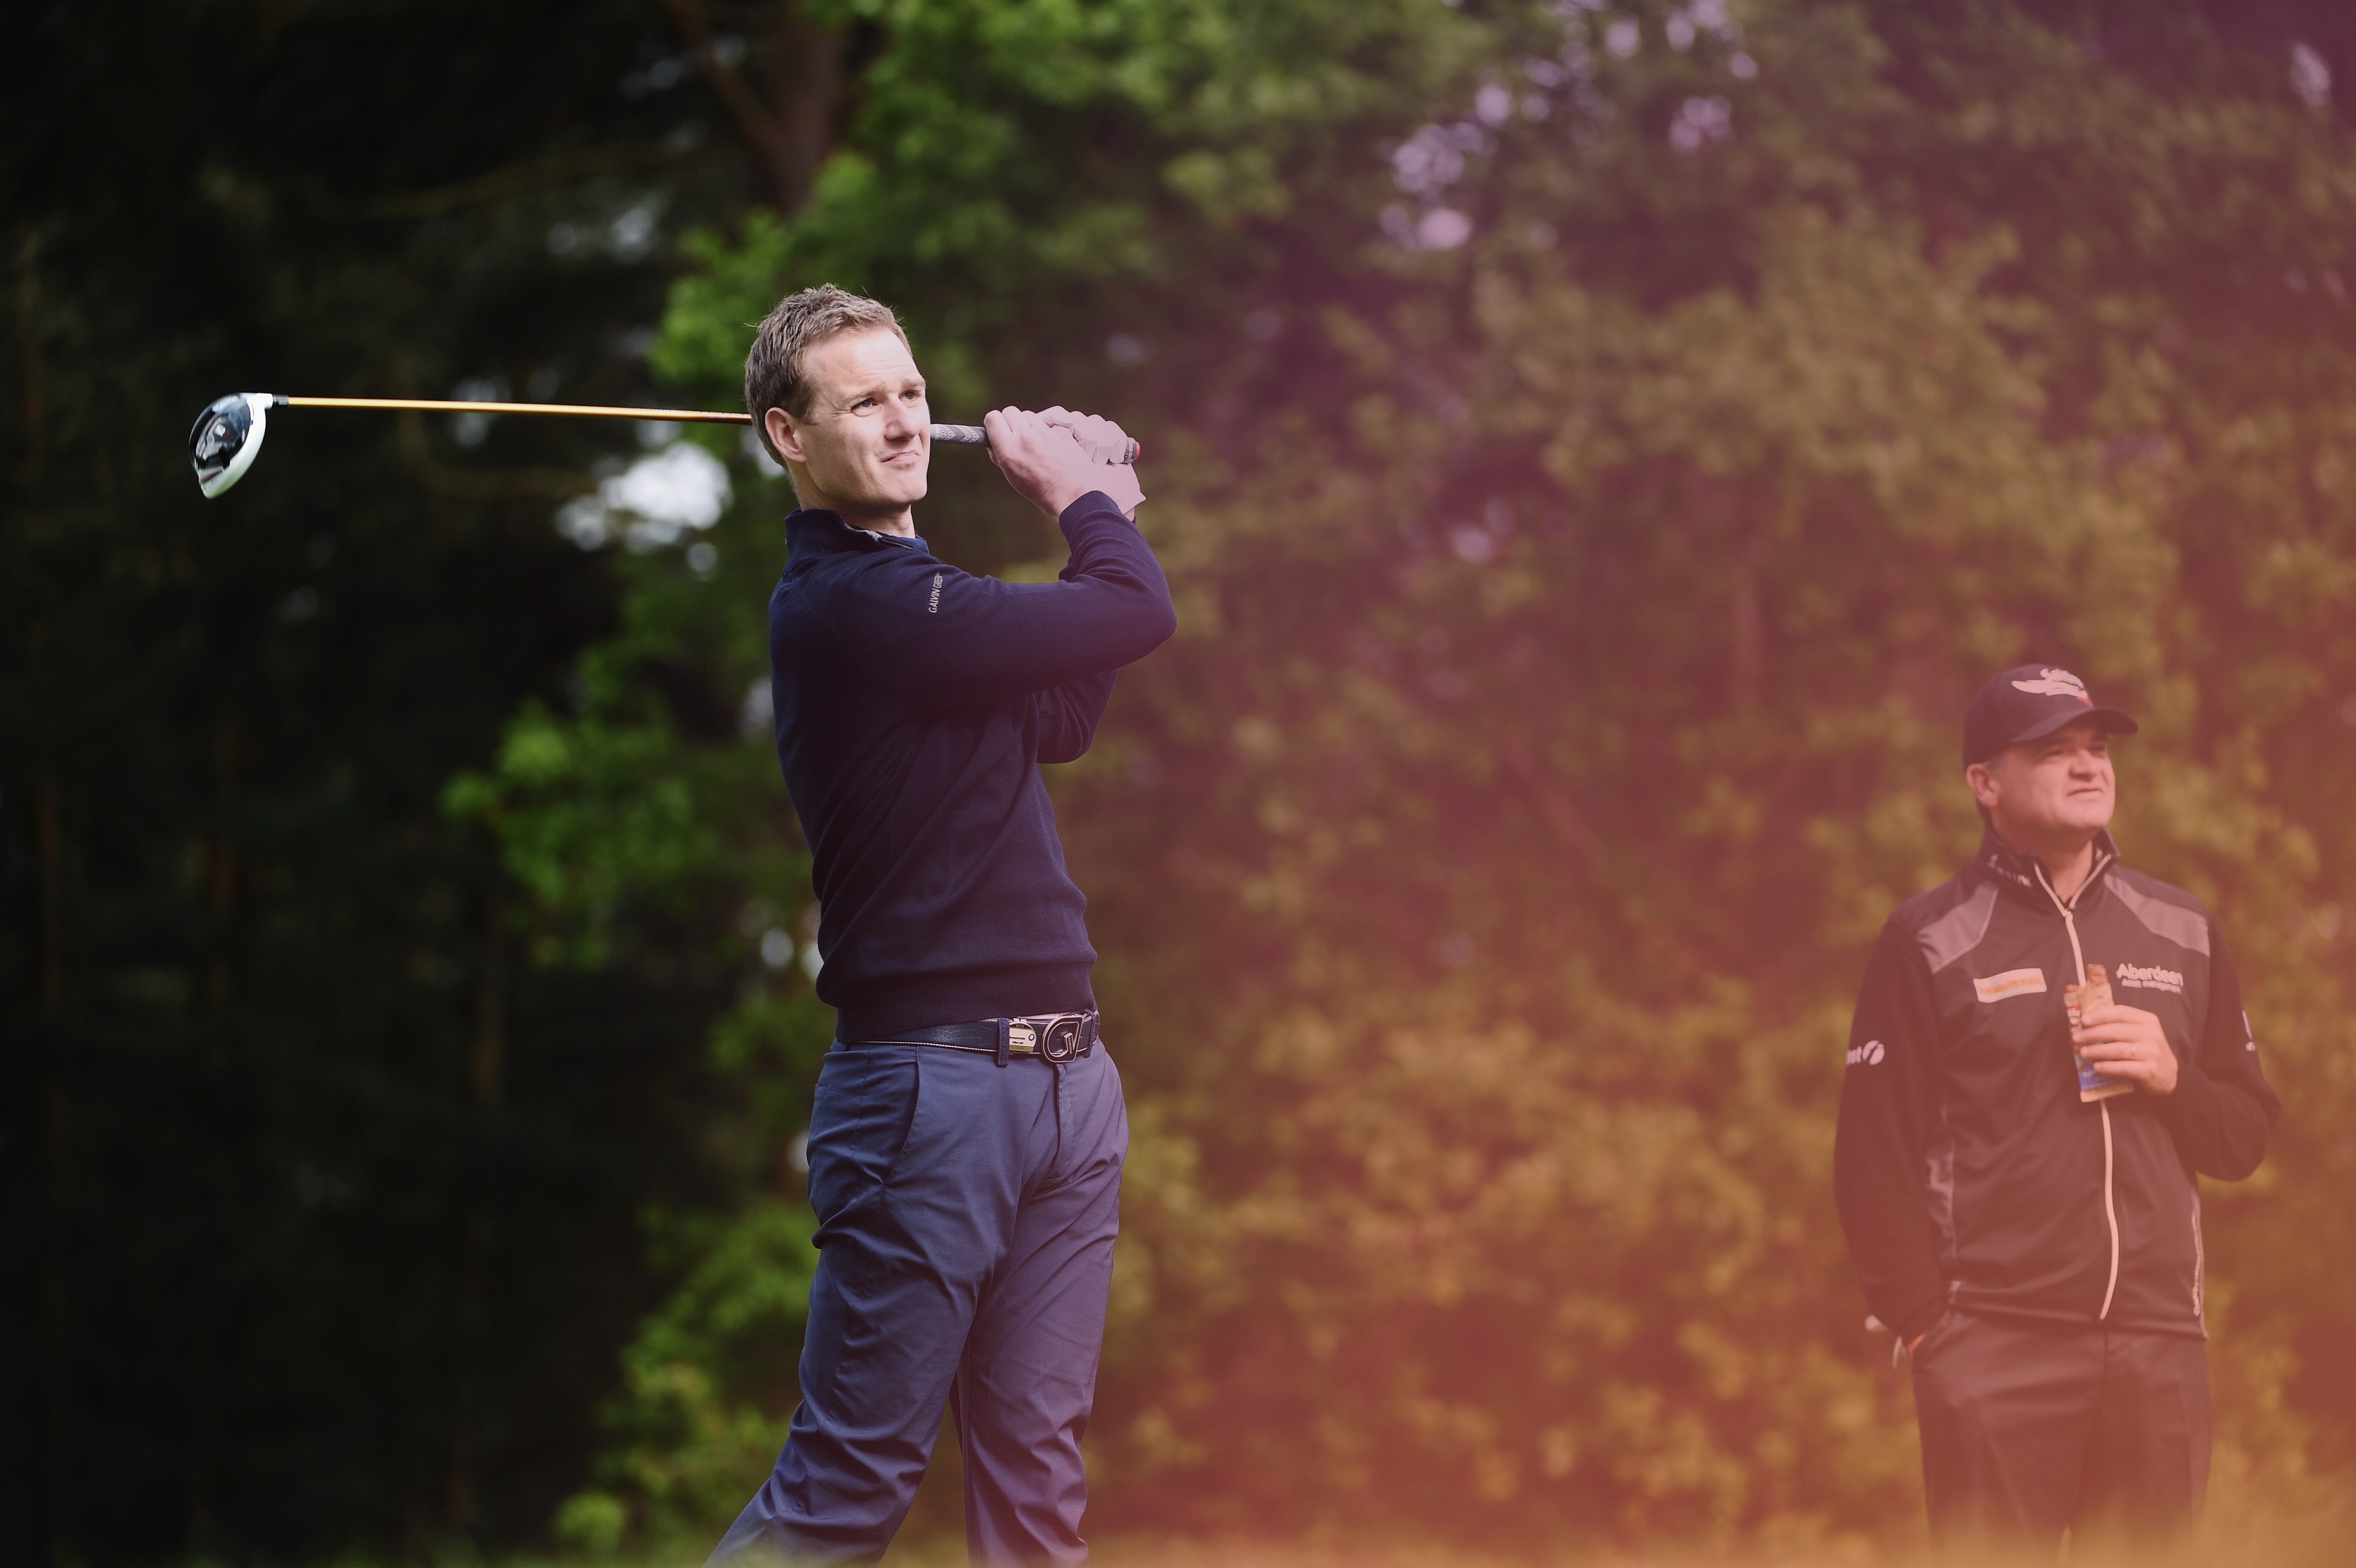 VIRGINIA WATER, ENGLAND - MAY 20:   Dan Walker of the BBC tees off during the Pro-Am ahead of the BMW PGA Championship at Wentworth on May 20, 2015 in Virginia Water, England.  (Photo by Ross Kinnaird/Getty Images)